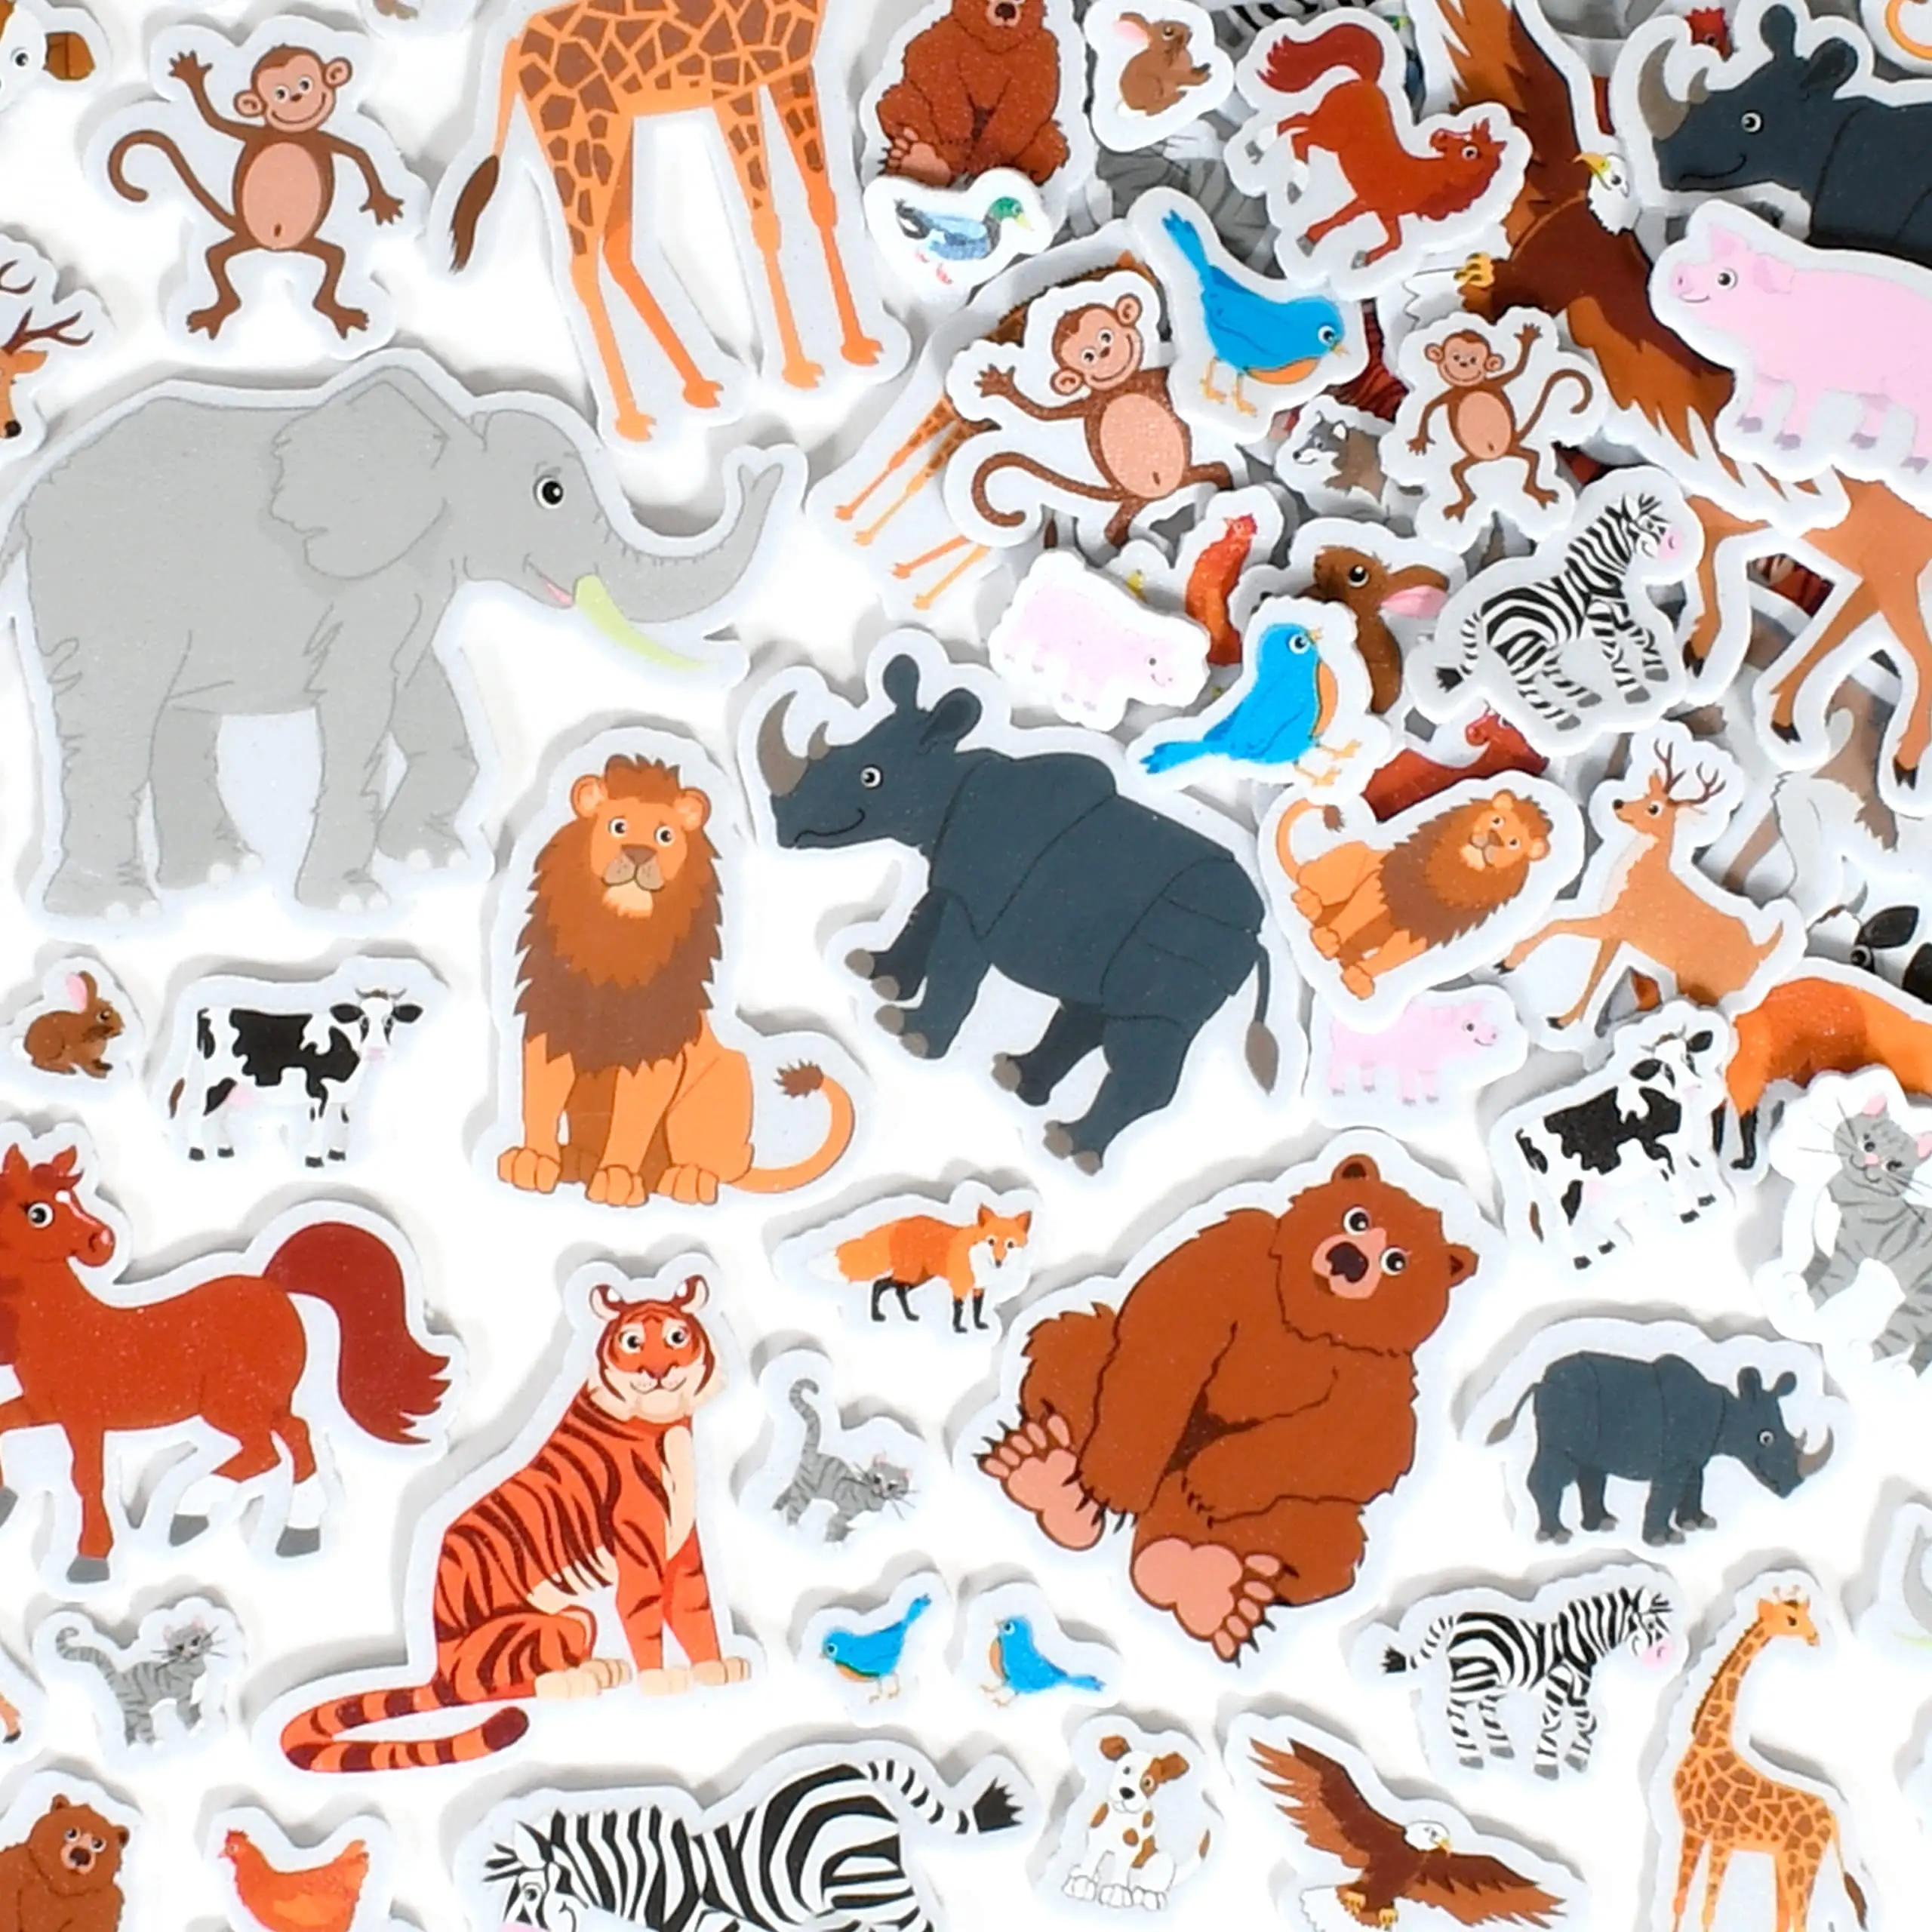 Foam Stickers Animals Foam Alphabet Stickers 3D Puffy Animal Stickers For Laptops Party Favors And Crafts